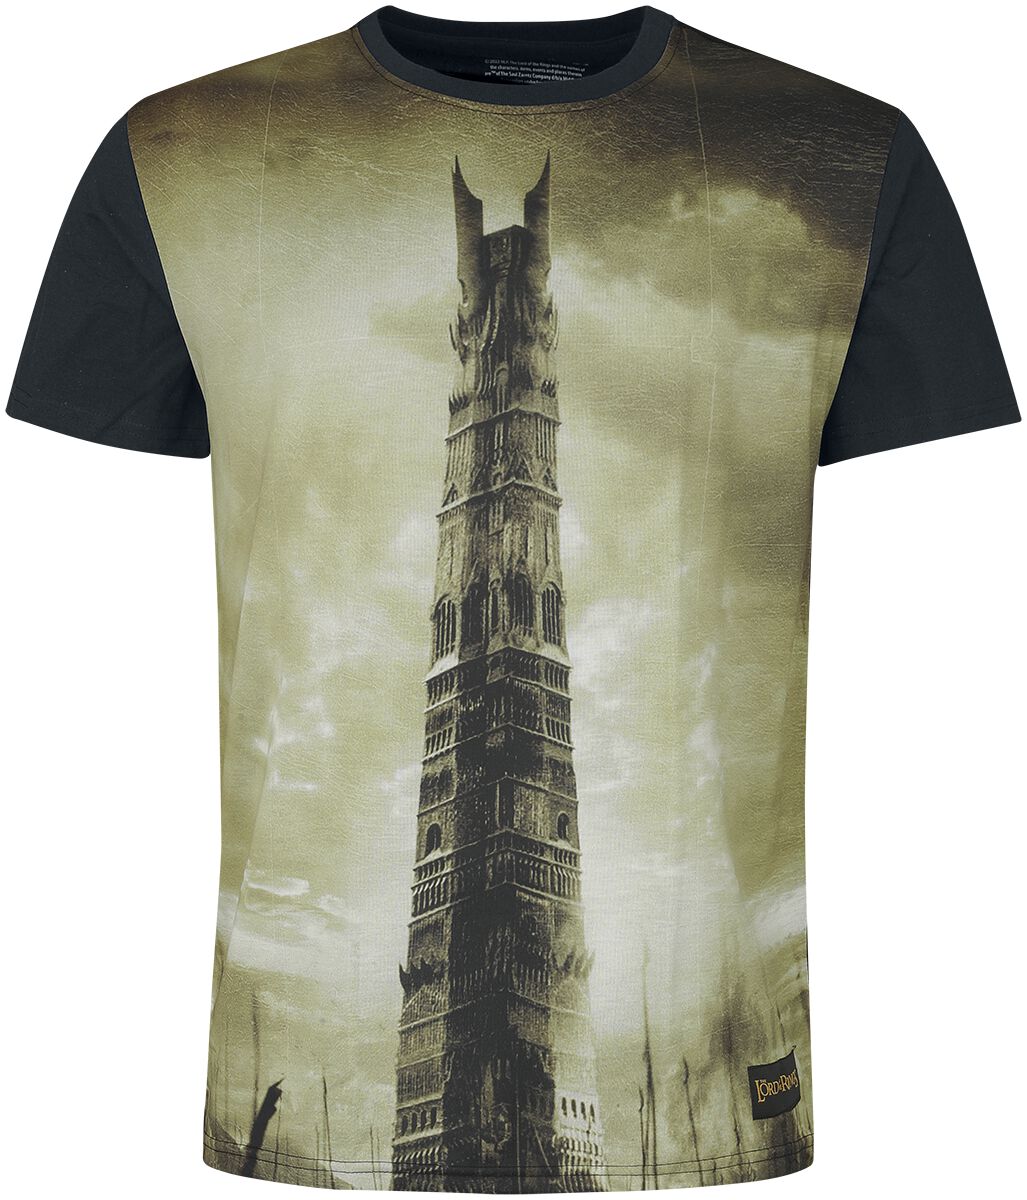 The Lord Of The Rings The Tower of Sauron T-Shirt multicolour